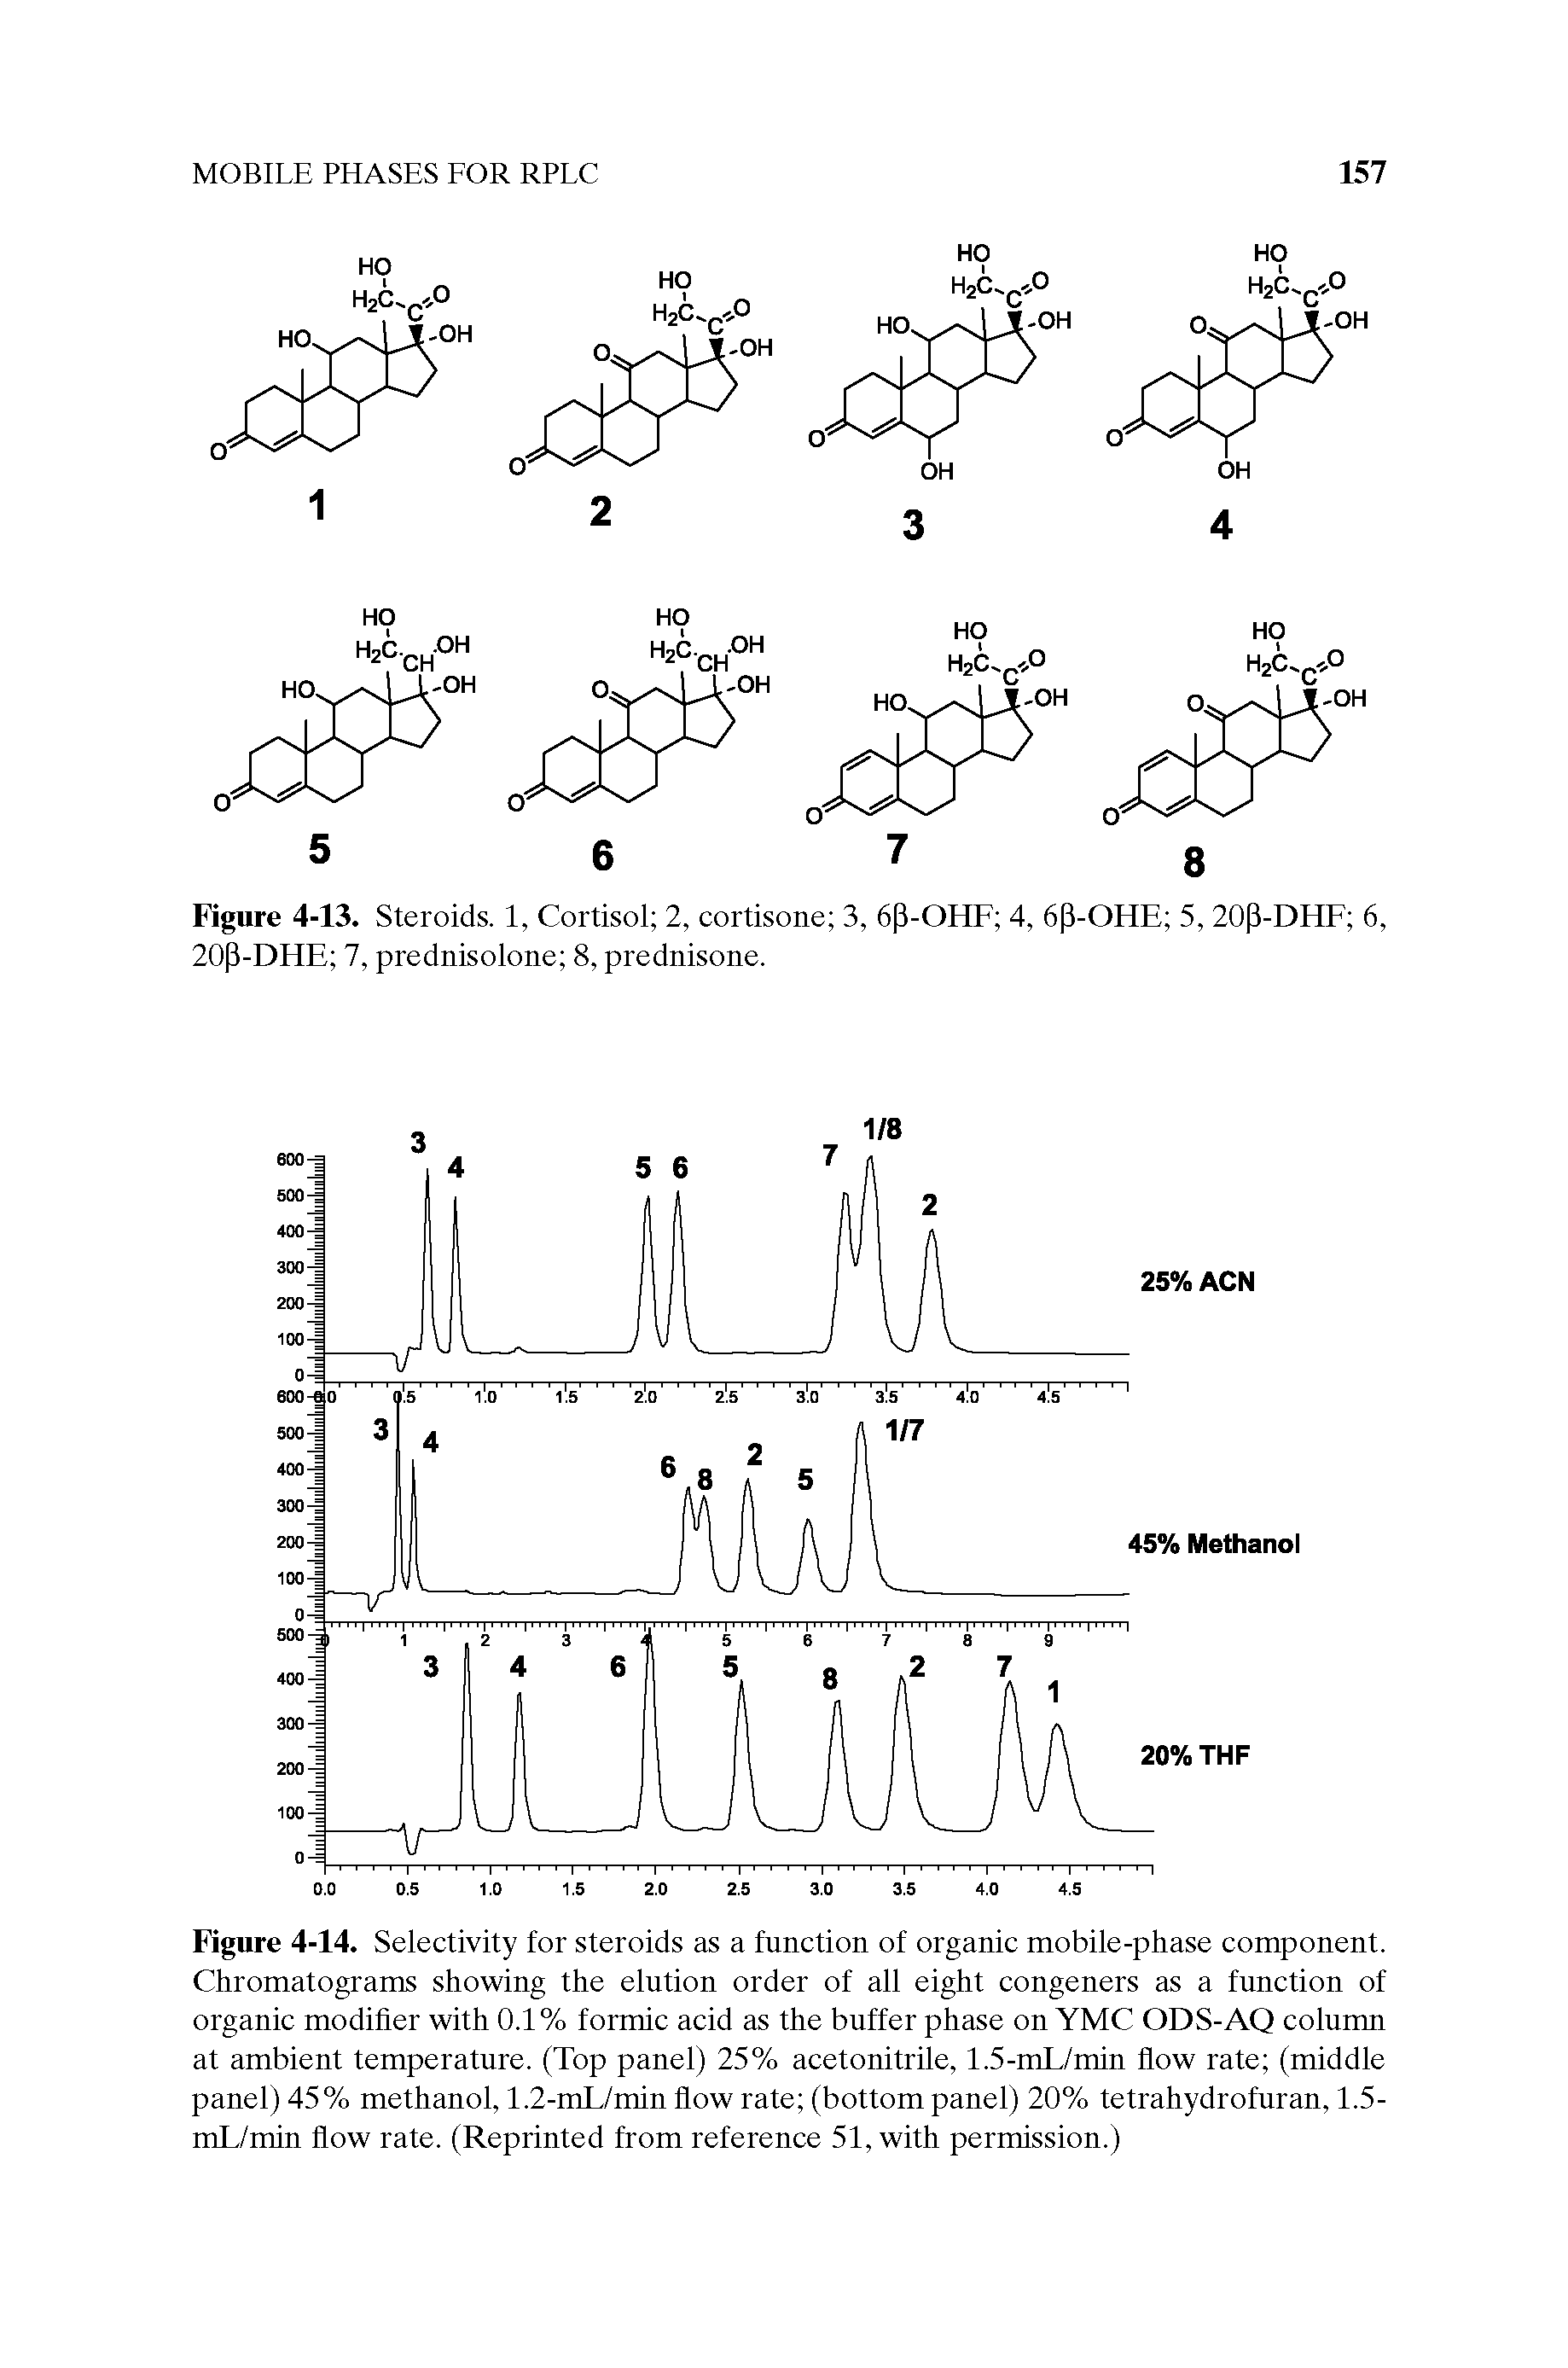 Figure 4-14. Selectivity for steroids as a function of organic mobile-phase component. Chromatograms showing the elution order of ail eight congeners as a function of organic modifier with 0.1% formic acid as the buffer phase on YMC ODS-AQ column at ambient temperature. (Top panel) 25% acetonitrile, 1.5-mL/min flow rate (middle panel) 45% methanol, 1.2-mL/min flow rate (bottom panel) 20% tetrahydrofuran, 1.5-mL/min flow rate. (Reprinted from reference 51, with permission.)...